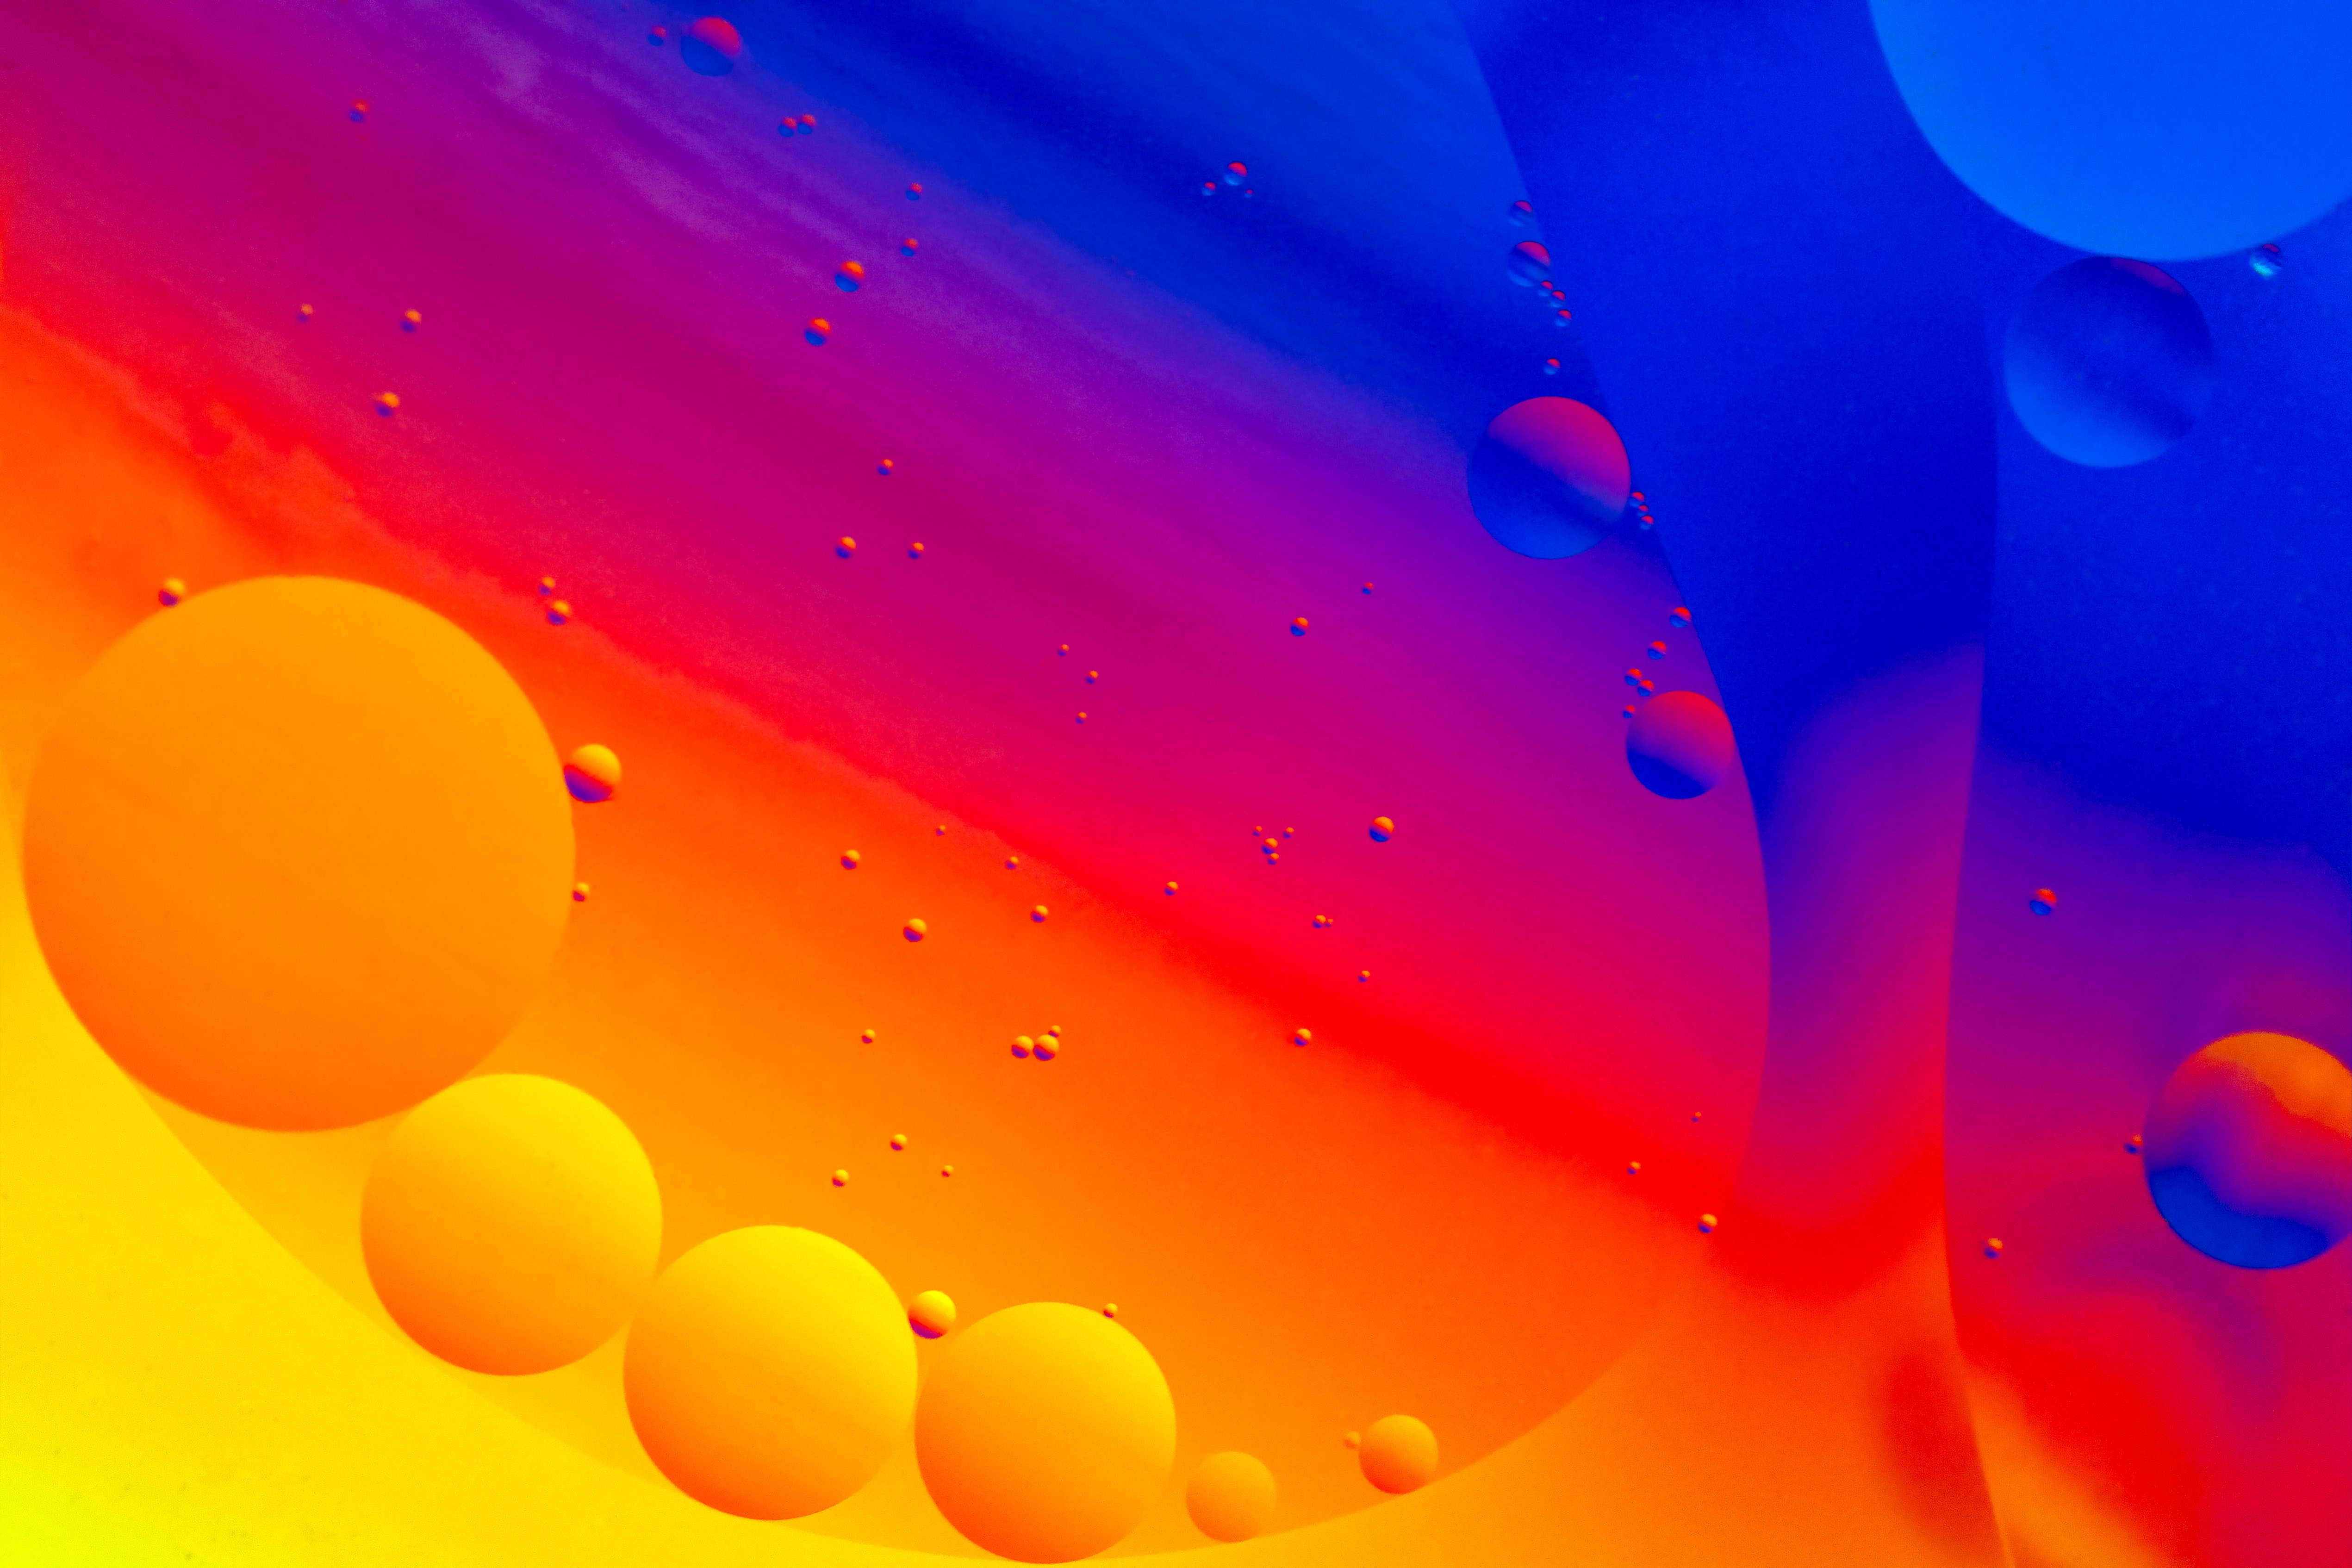 83894 download wallpaper multicolored, abstract, water, bubbles, motley, gradient screensavers and pictures for free